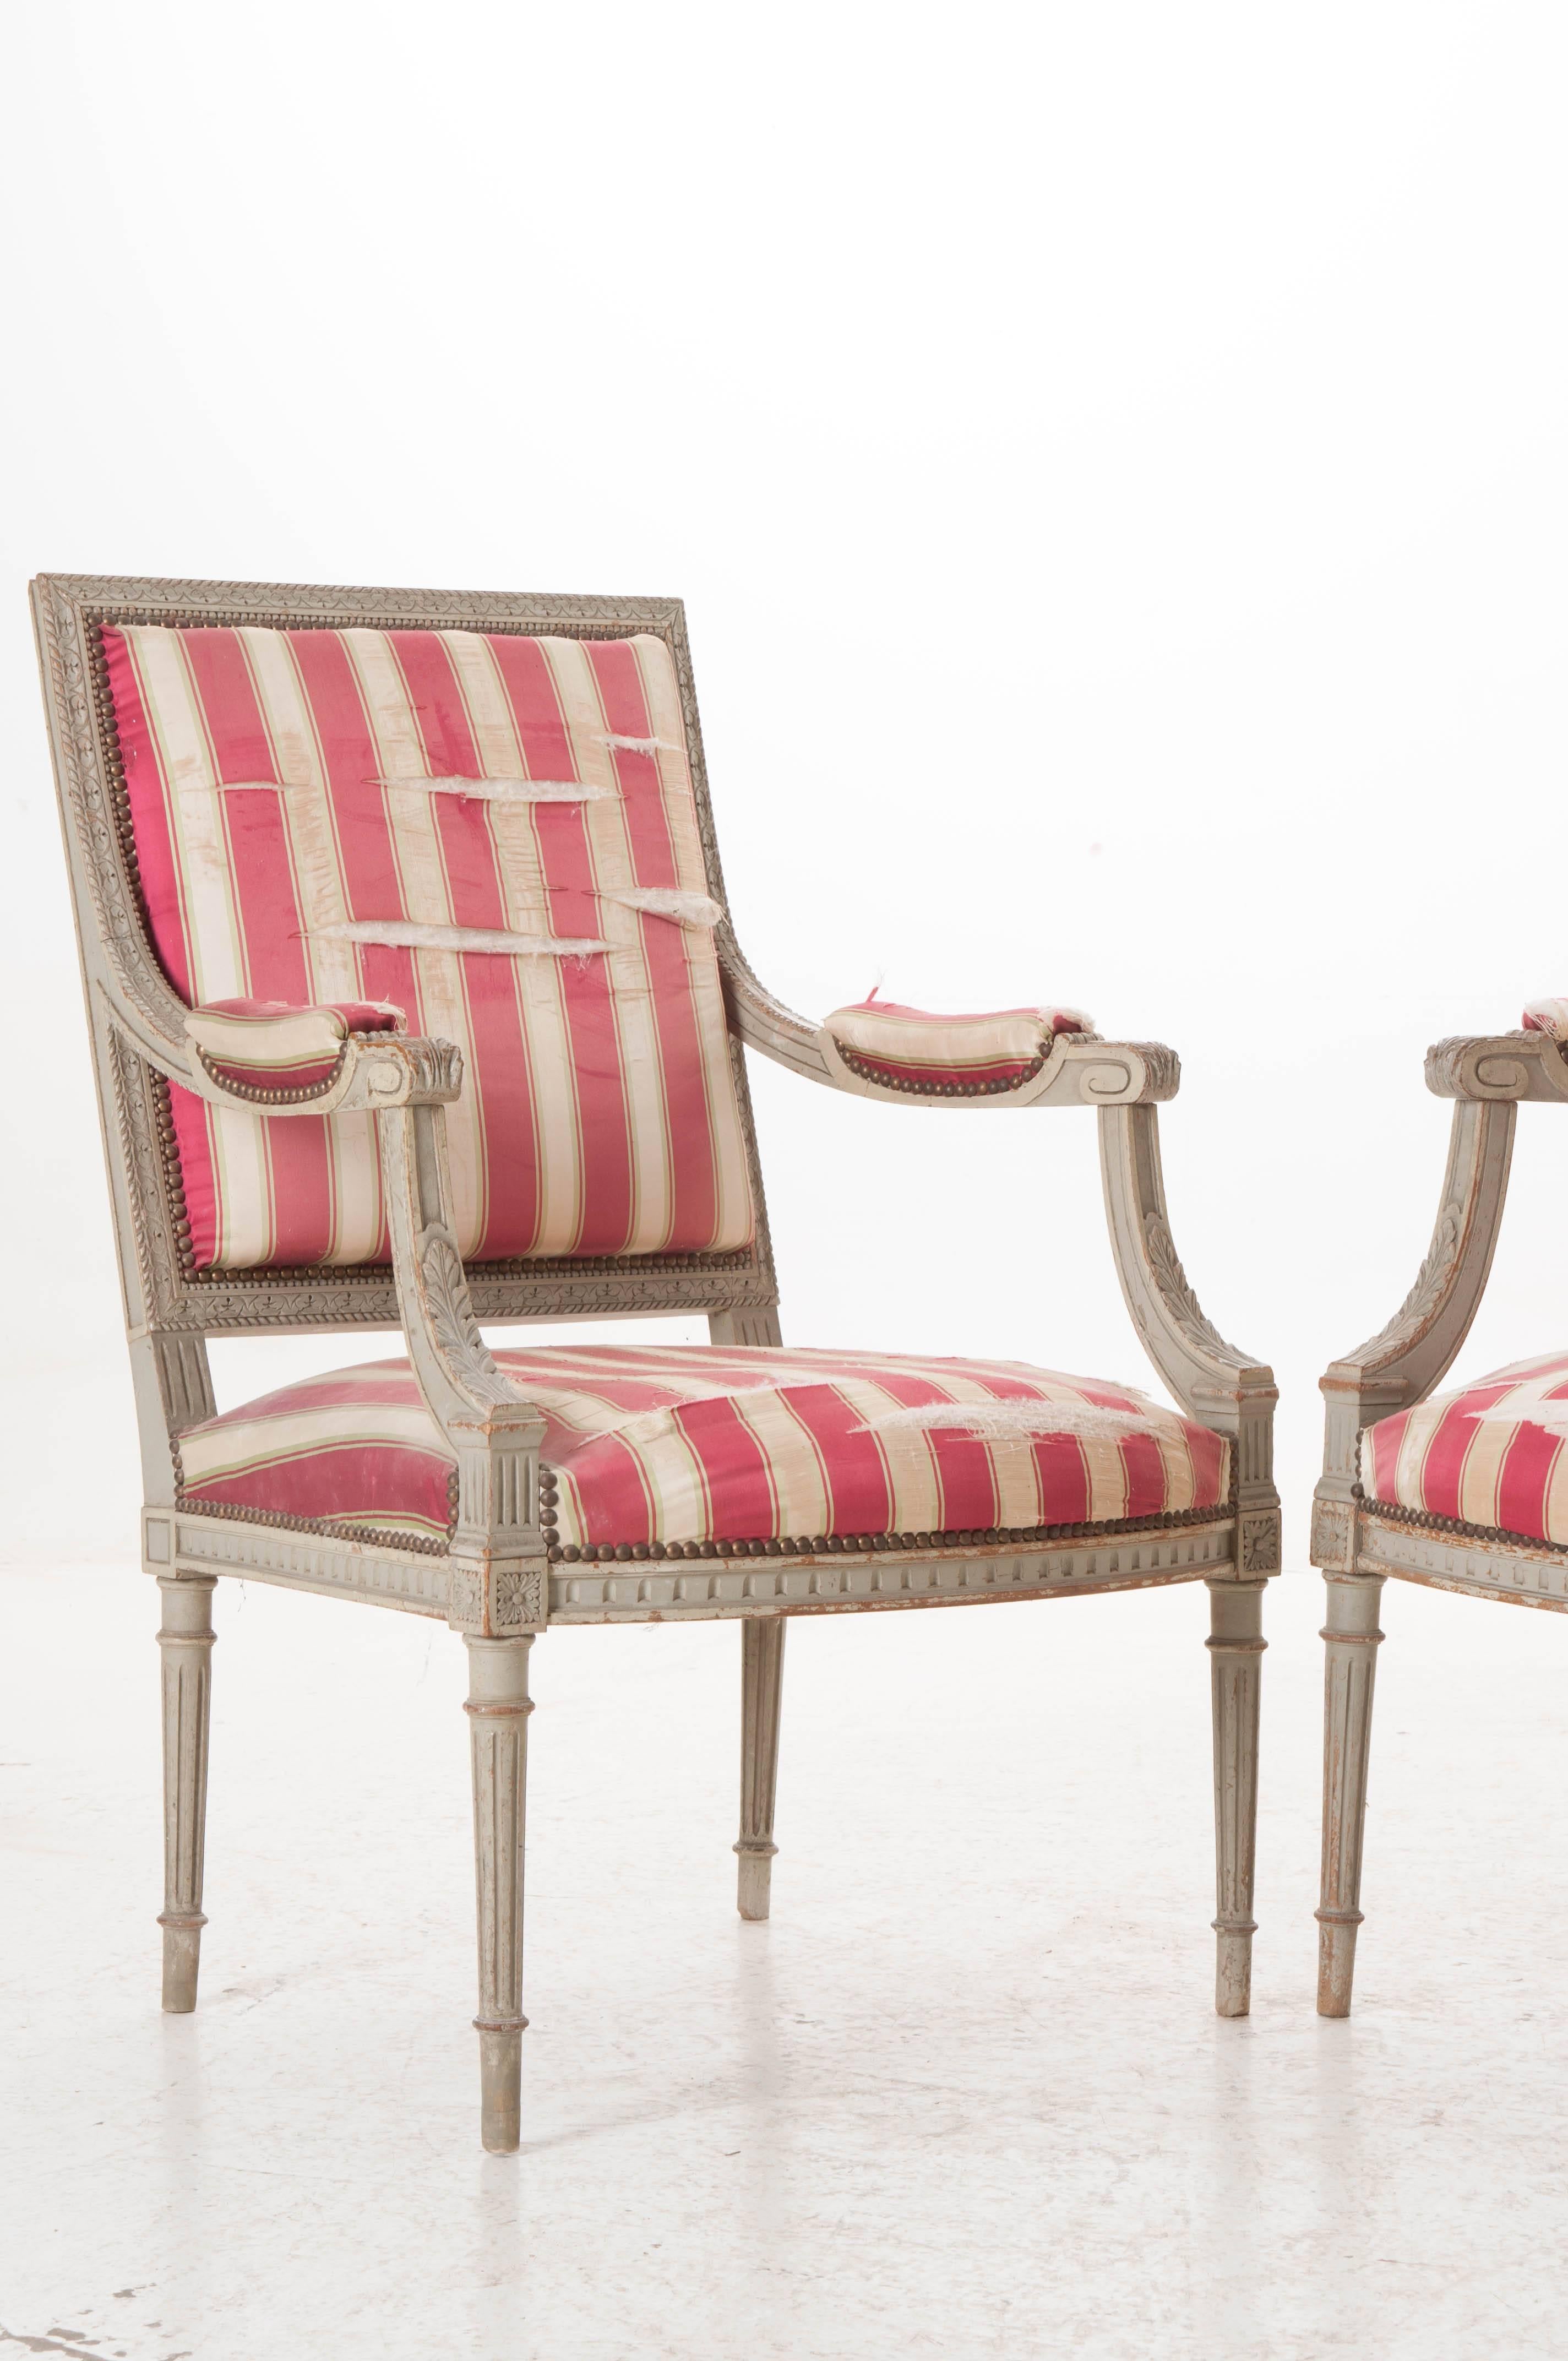 An incredible pair of French Louis XVI style Fauteuils from 1870. The pair is in need of reupholstering, but have exceptional frames that are decorated with fabulous carvings all-over. The square backs are surrounded by carved pearl and twisted